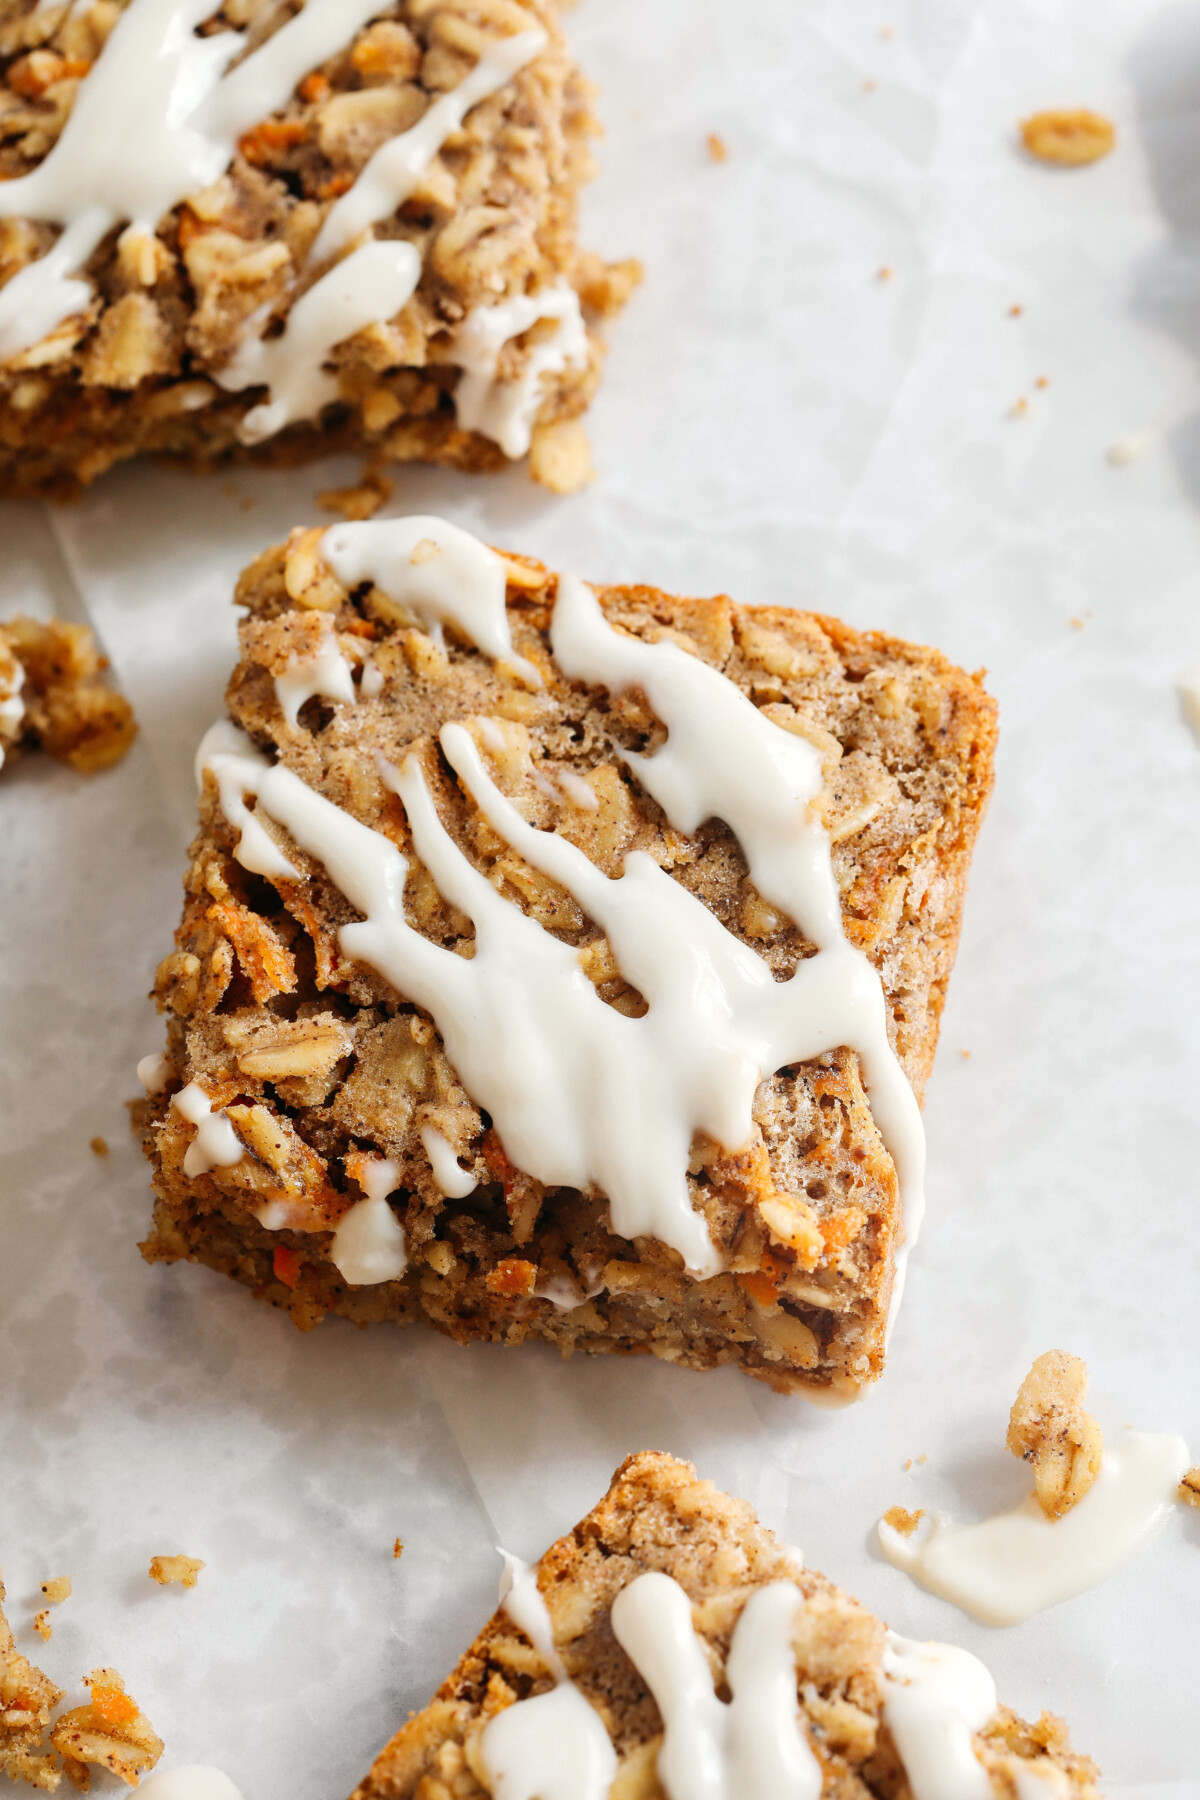 These EASY Carrot Cake Oatmeal Breakfast Bars make a quick on-the-go breakfast, snack or healthy dessert made with zero refined sugar and drizzled with a delicious maple cream cheese frosting! 